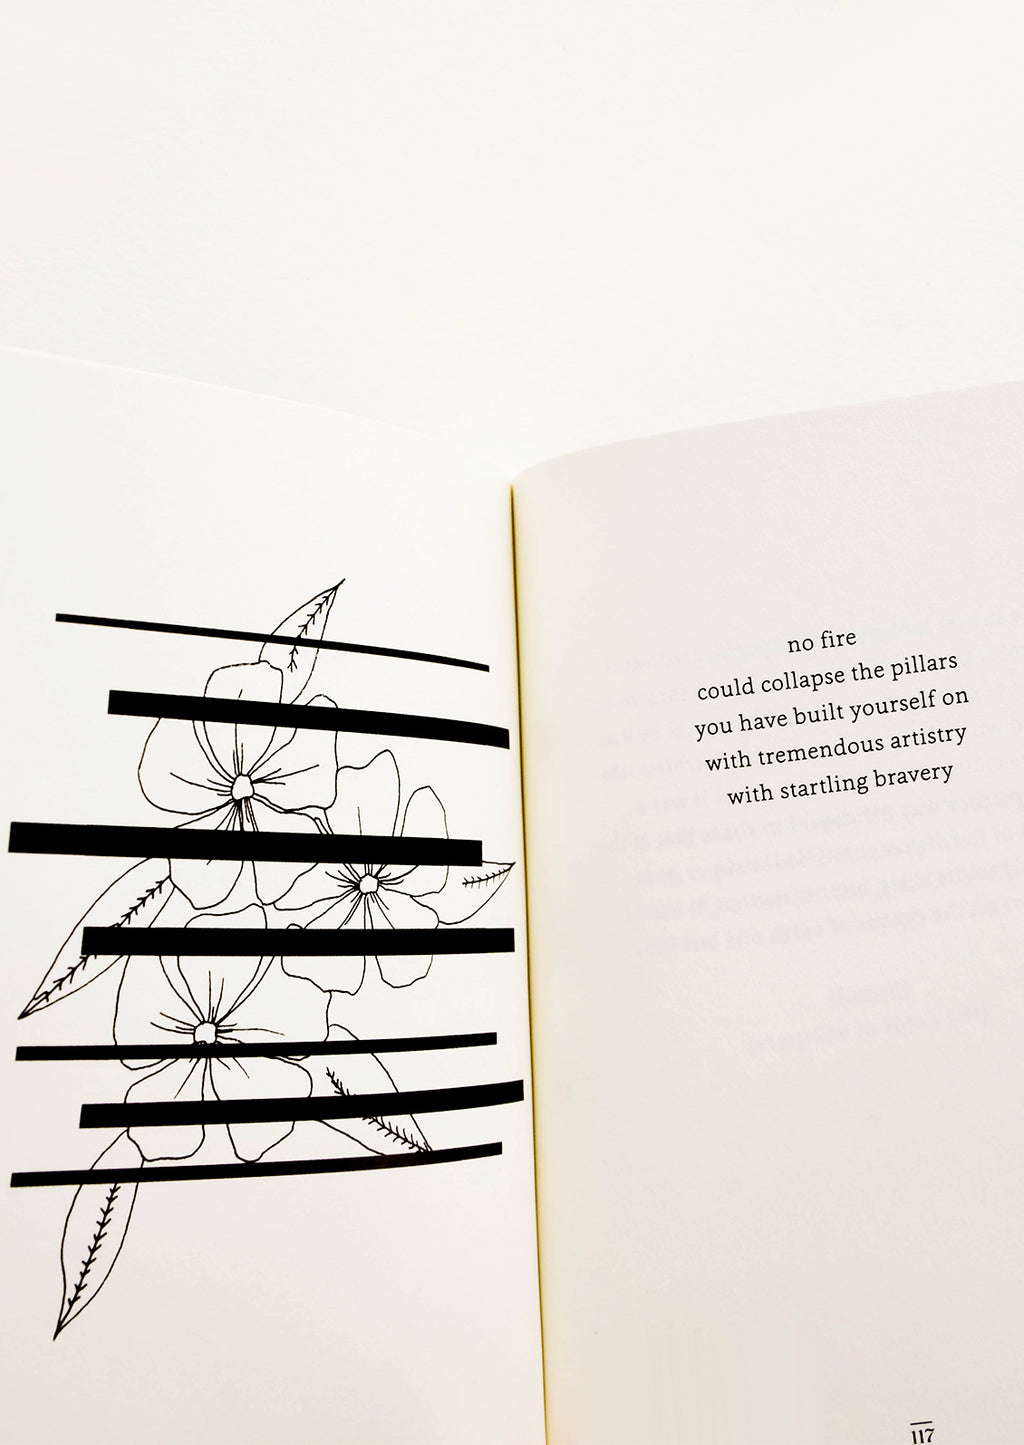 3: Inside pages of a softcover poetry book featuring a mix of illustrations and short poems